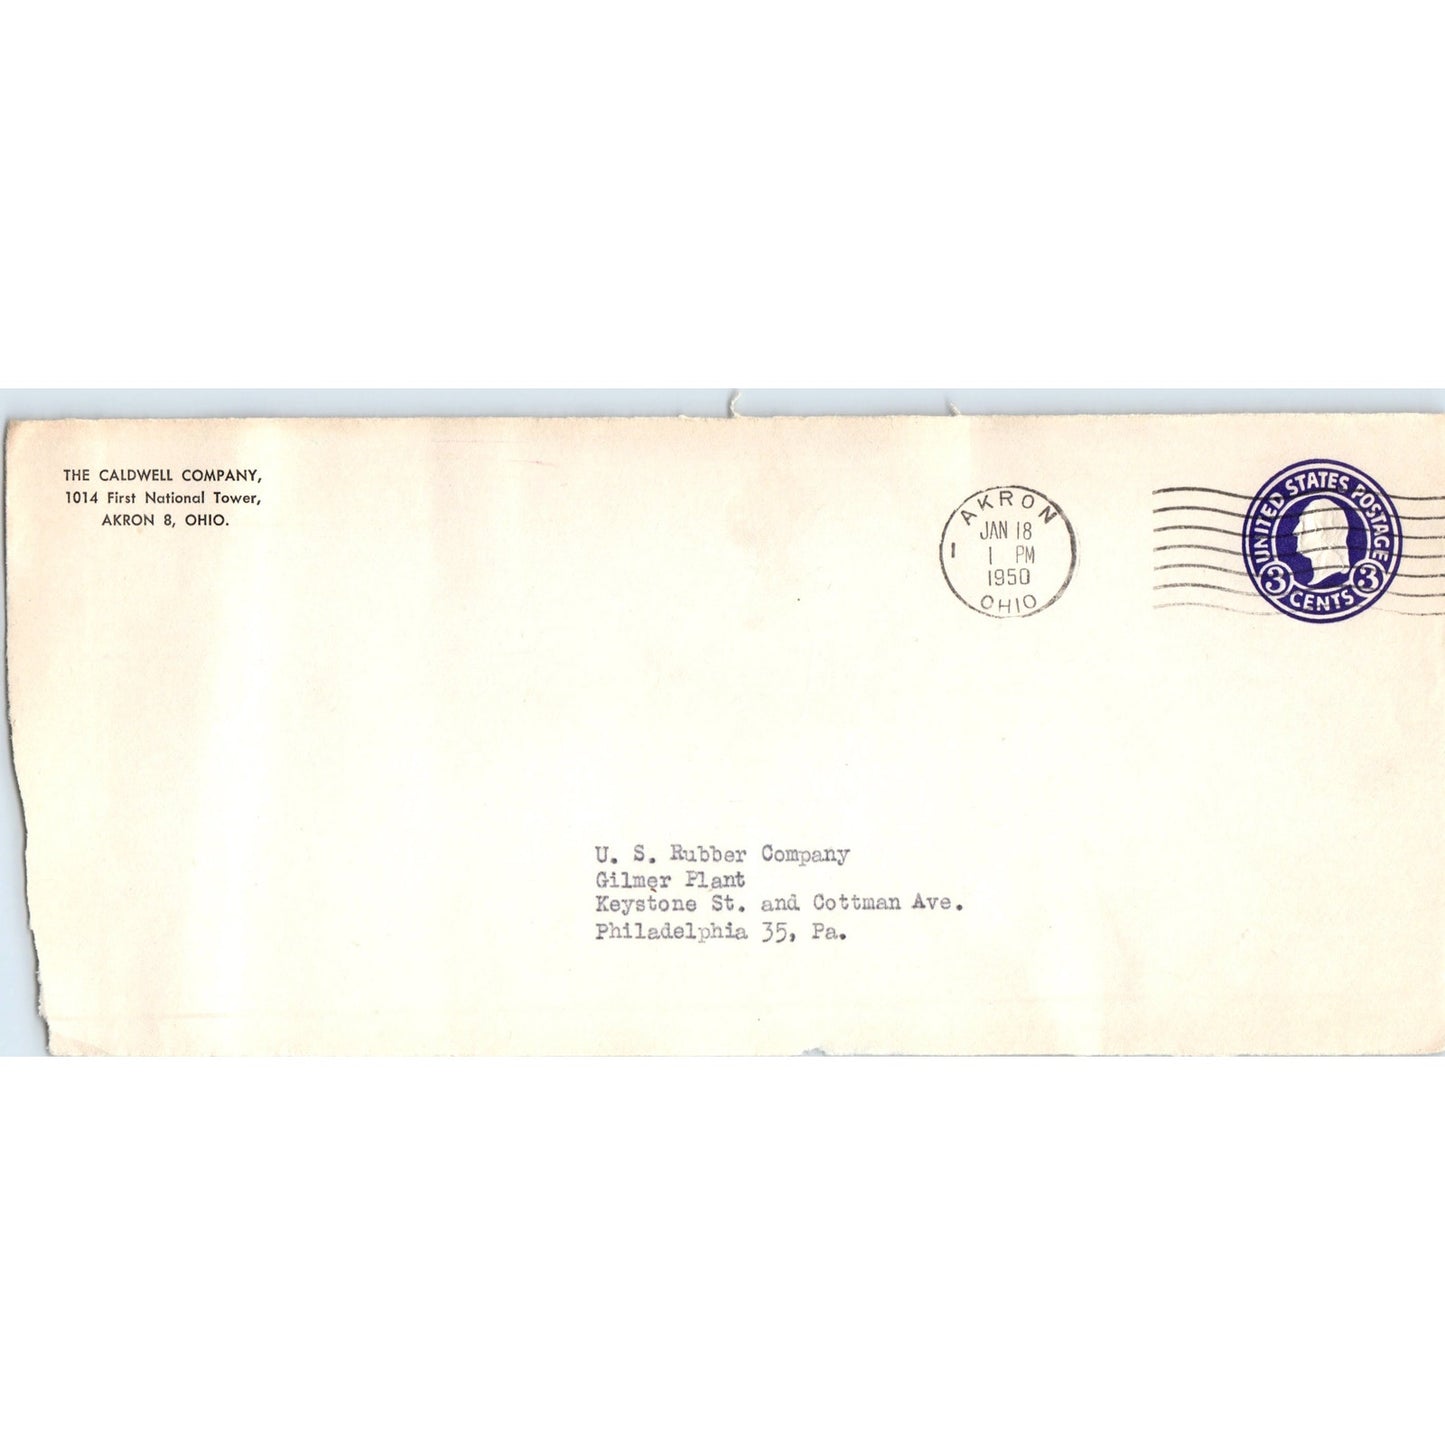 1950 The Caldwell Company Akron Ohio Postal Cover Envelope TH9-L1